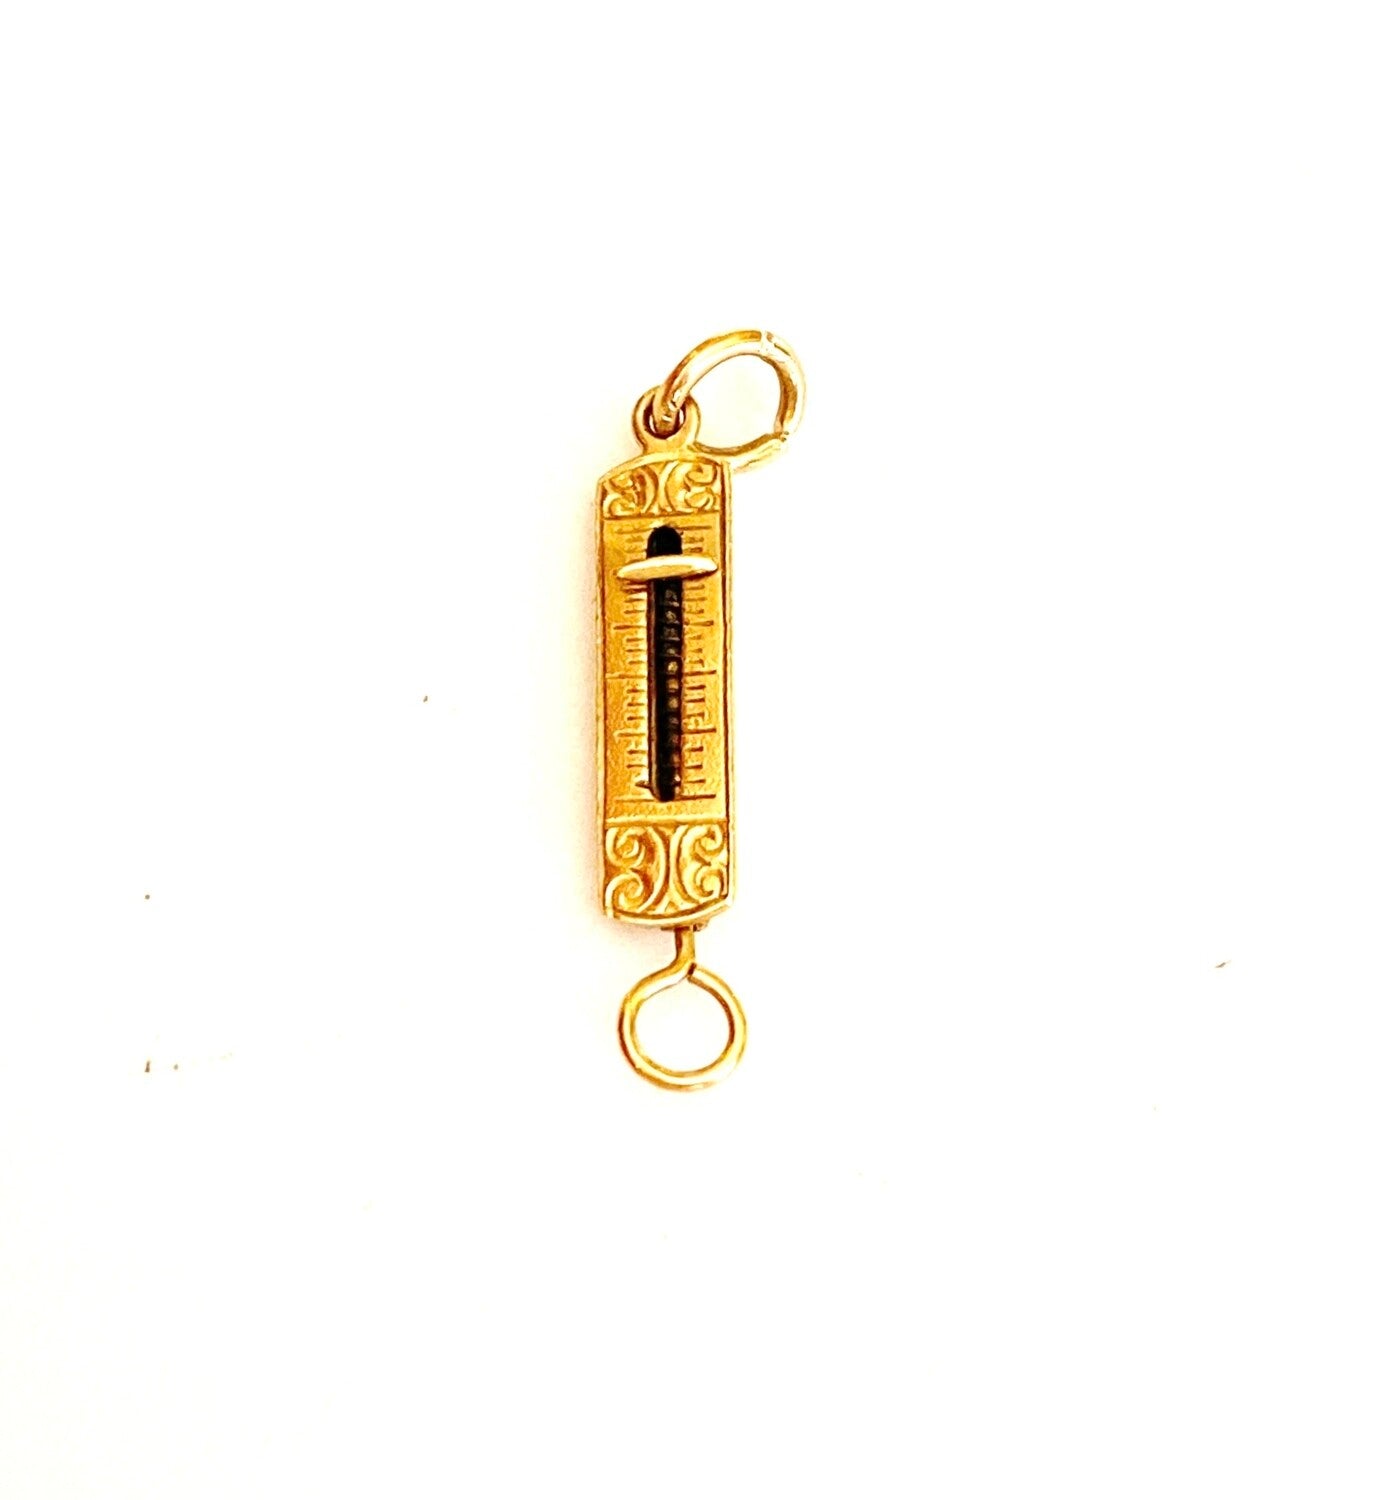 9ct vintage articulated scales charm circa 1953